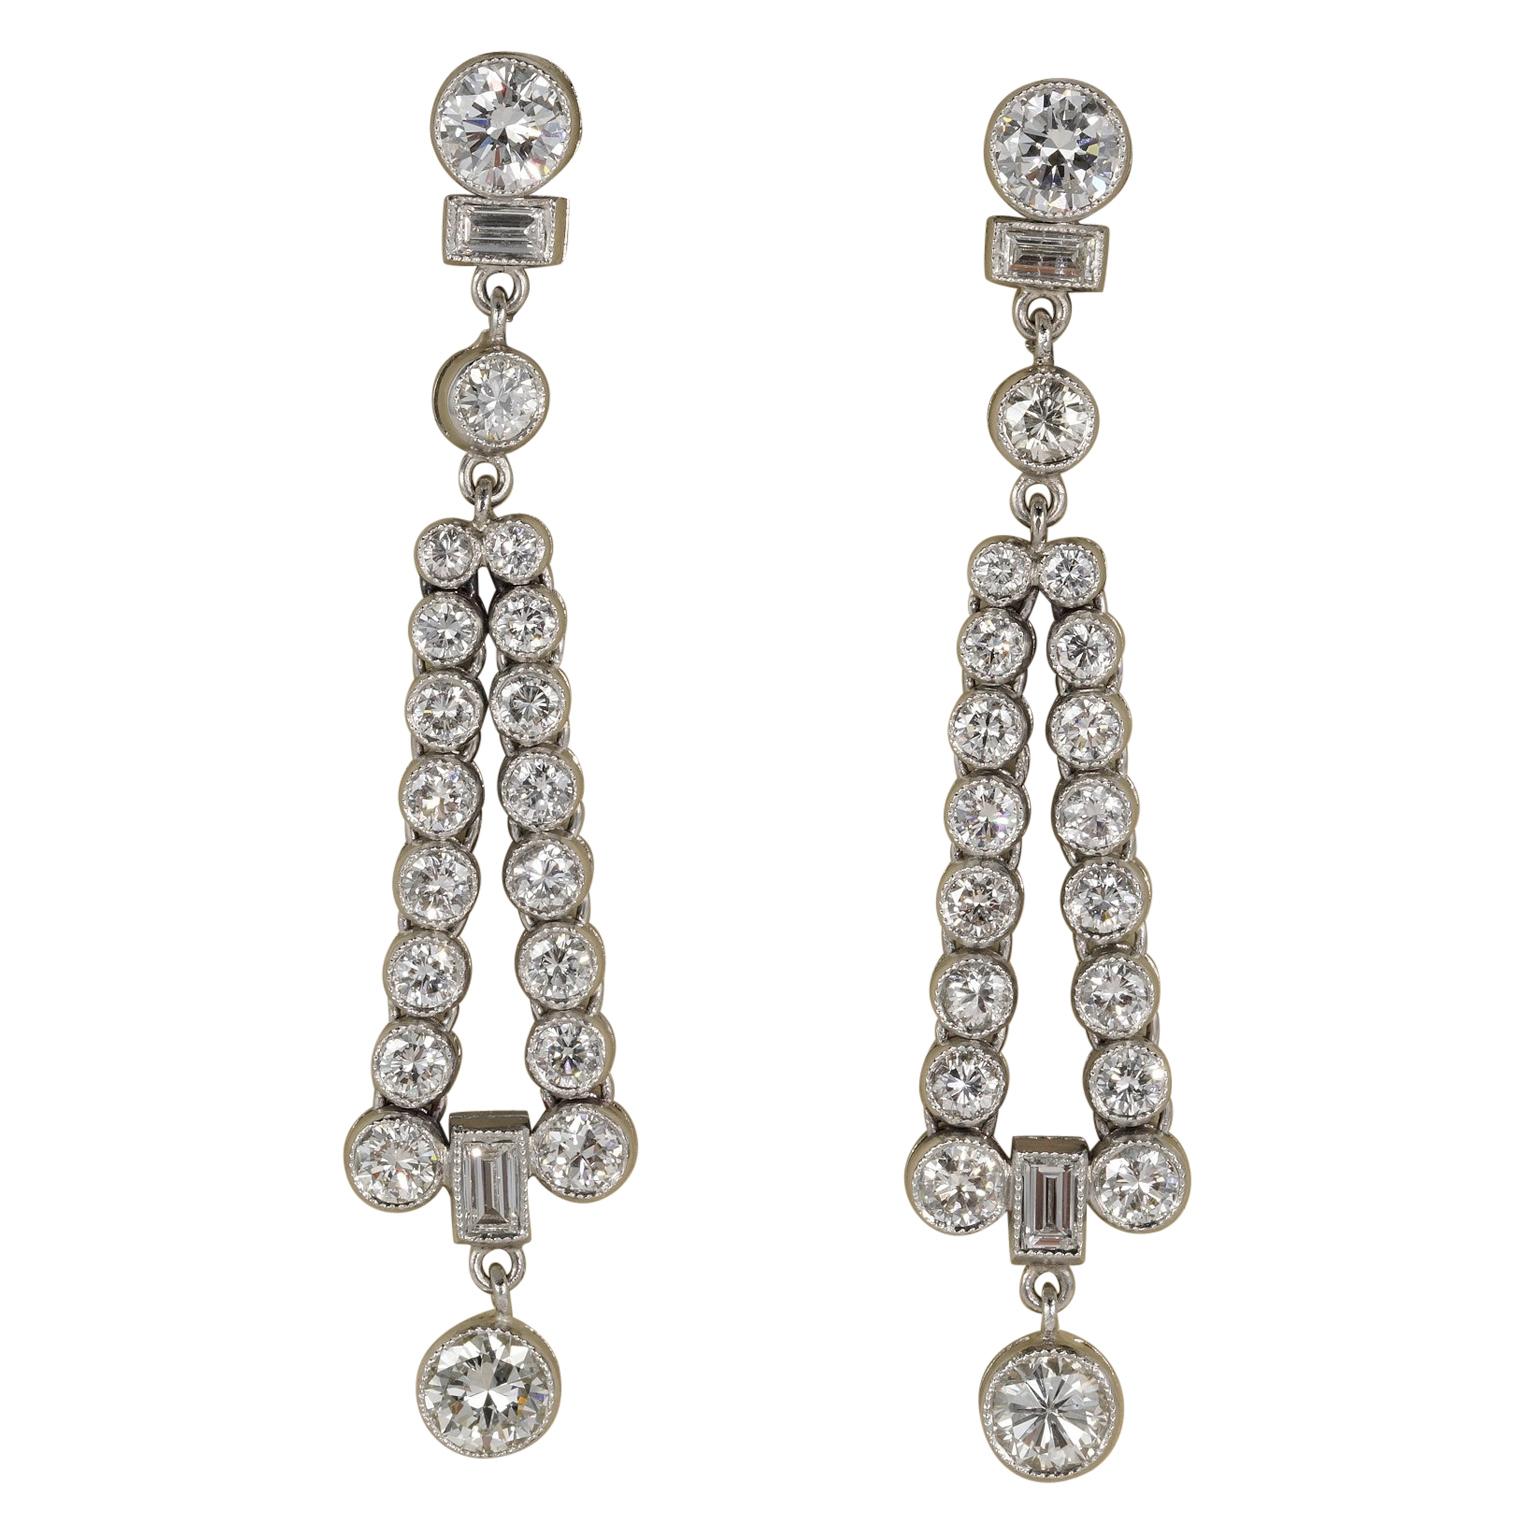 Exceptional Quality Art Deco 3.40 Carat Diamond Rare Earrings For Sale